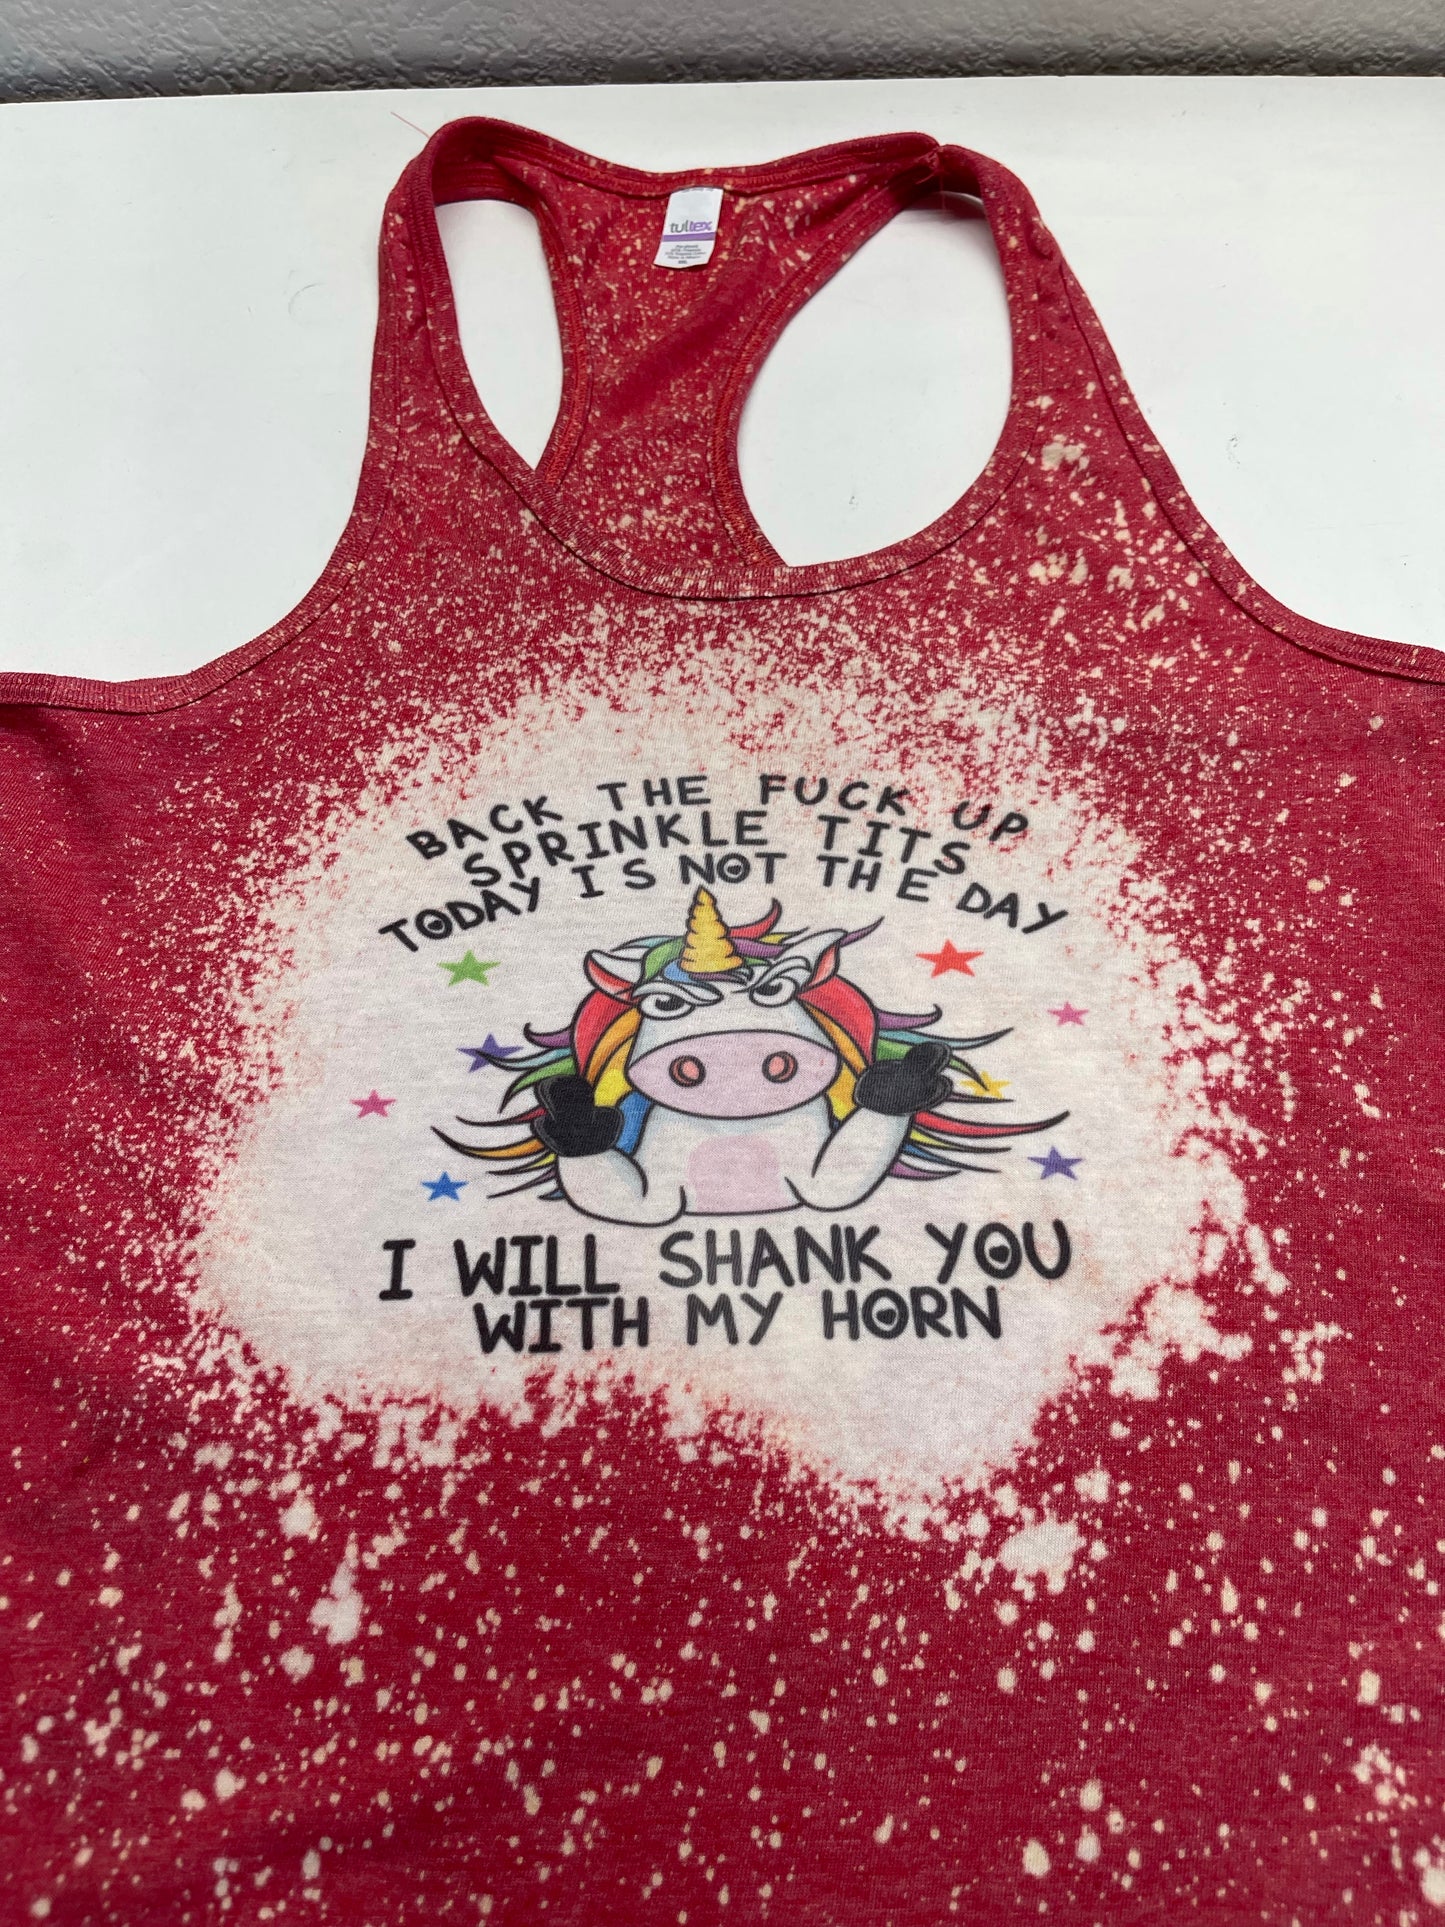 Shank you with my horn funny unicorn bleached tank